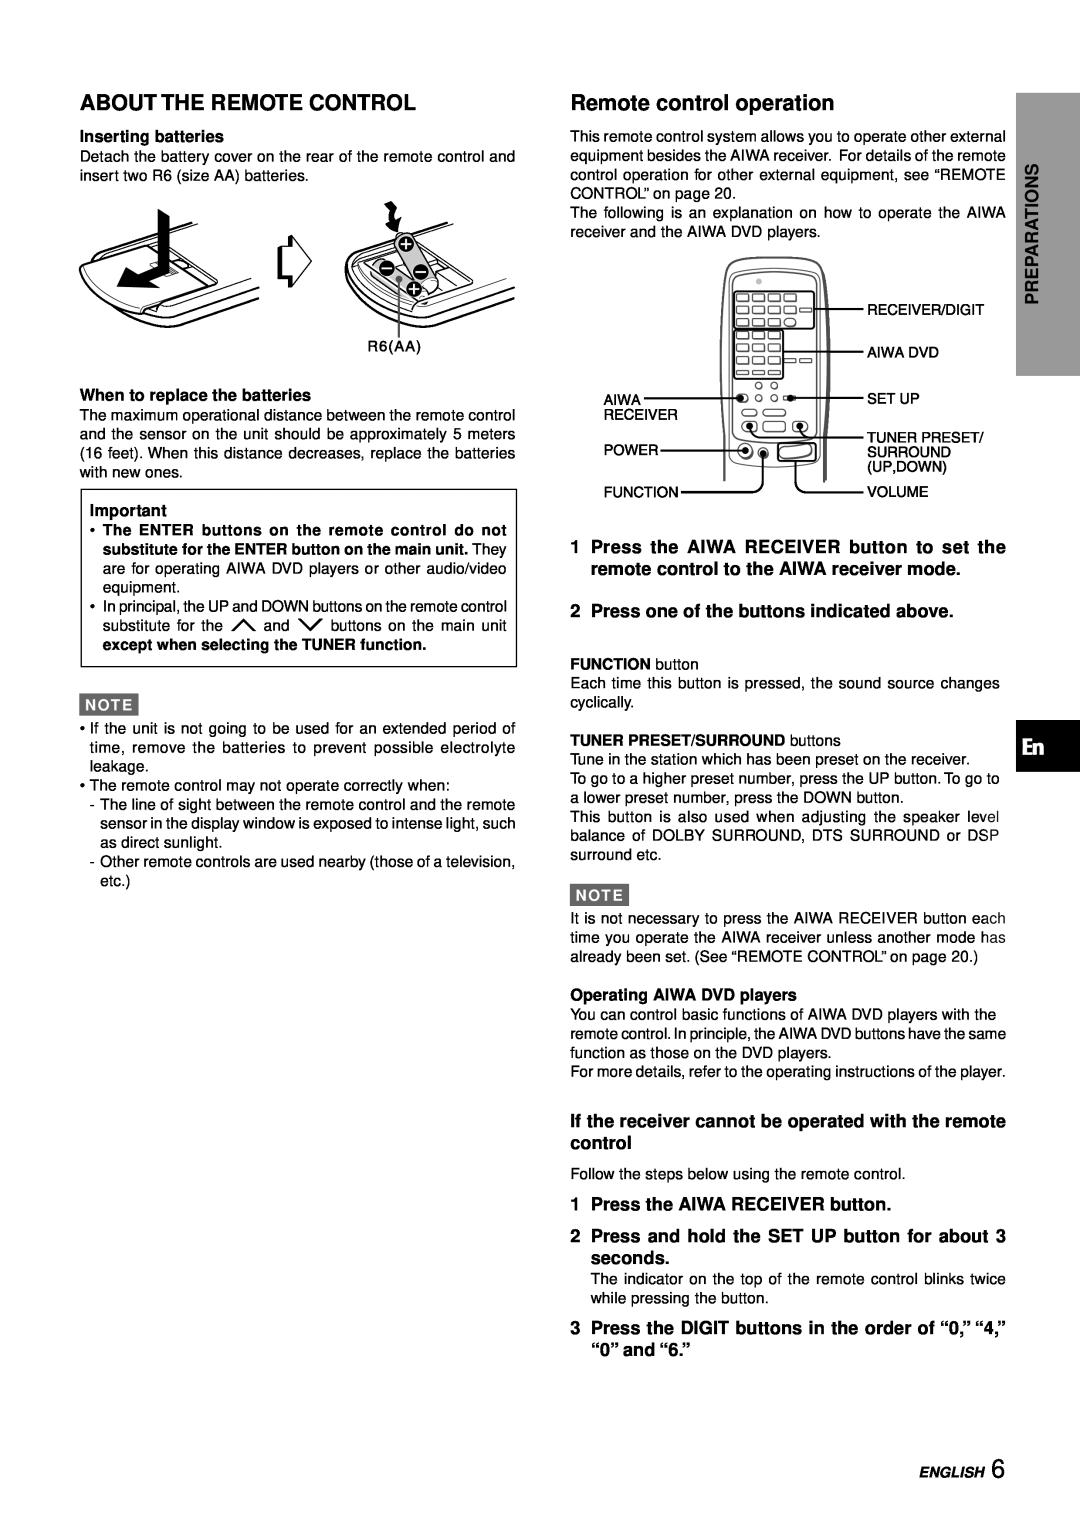 Aiwa AV-D77 About The Remote Control, Remote control operation, Press one of the buttons indicated above, seconds, English 